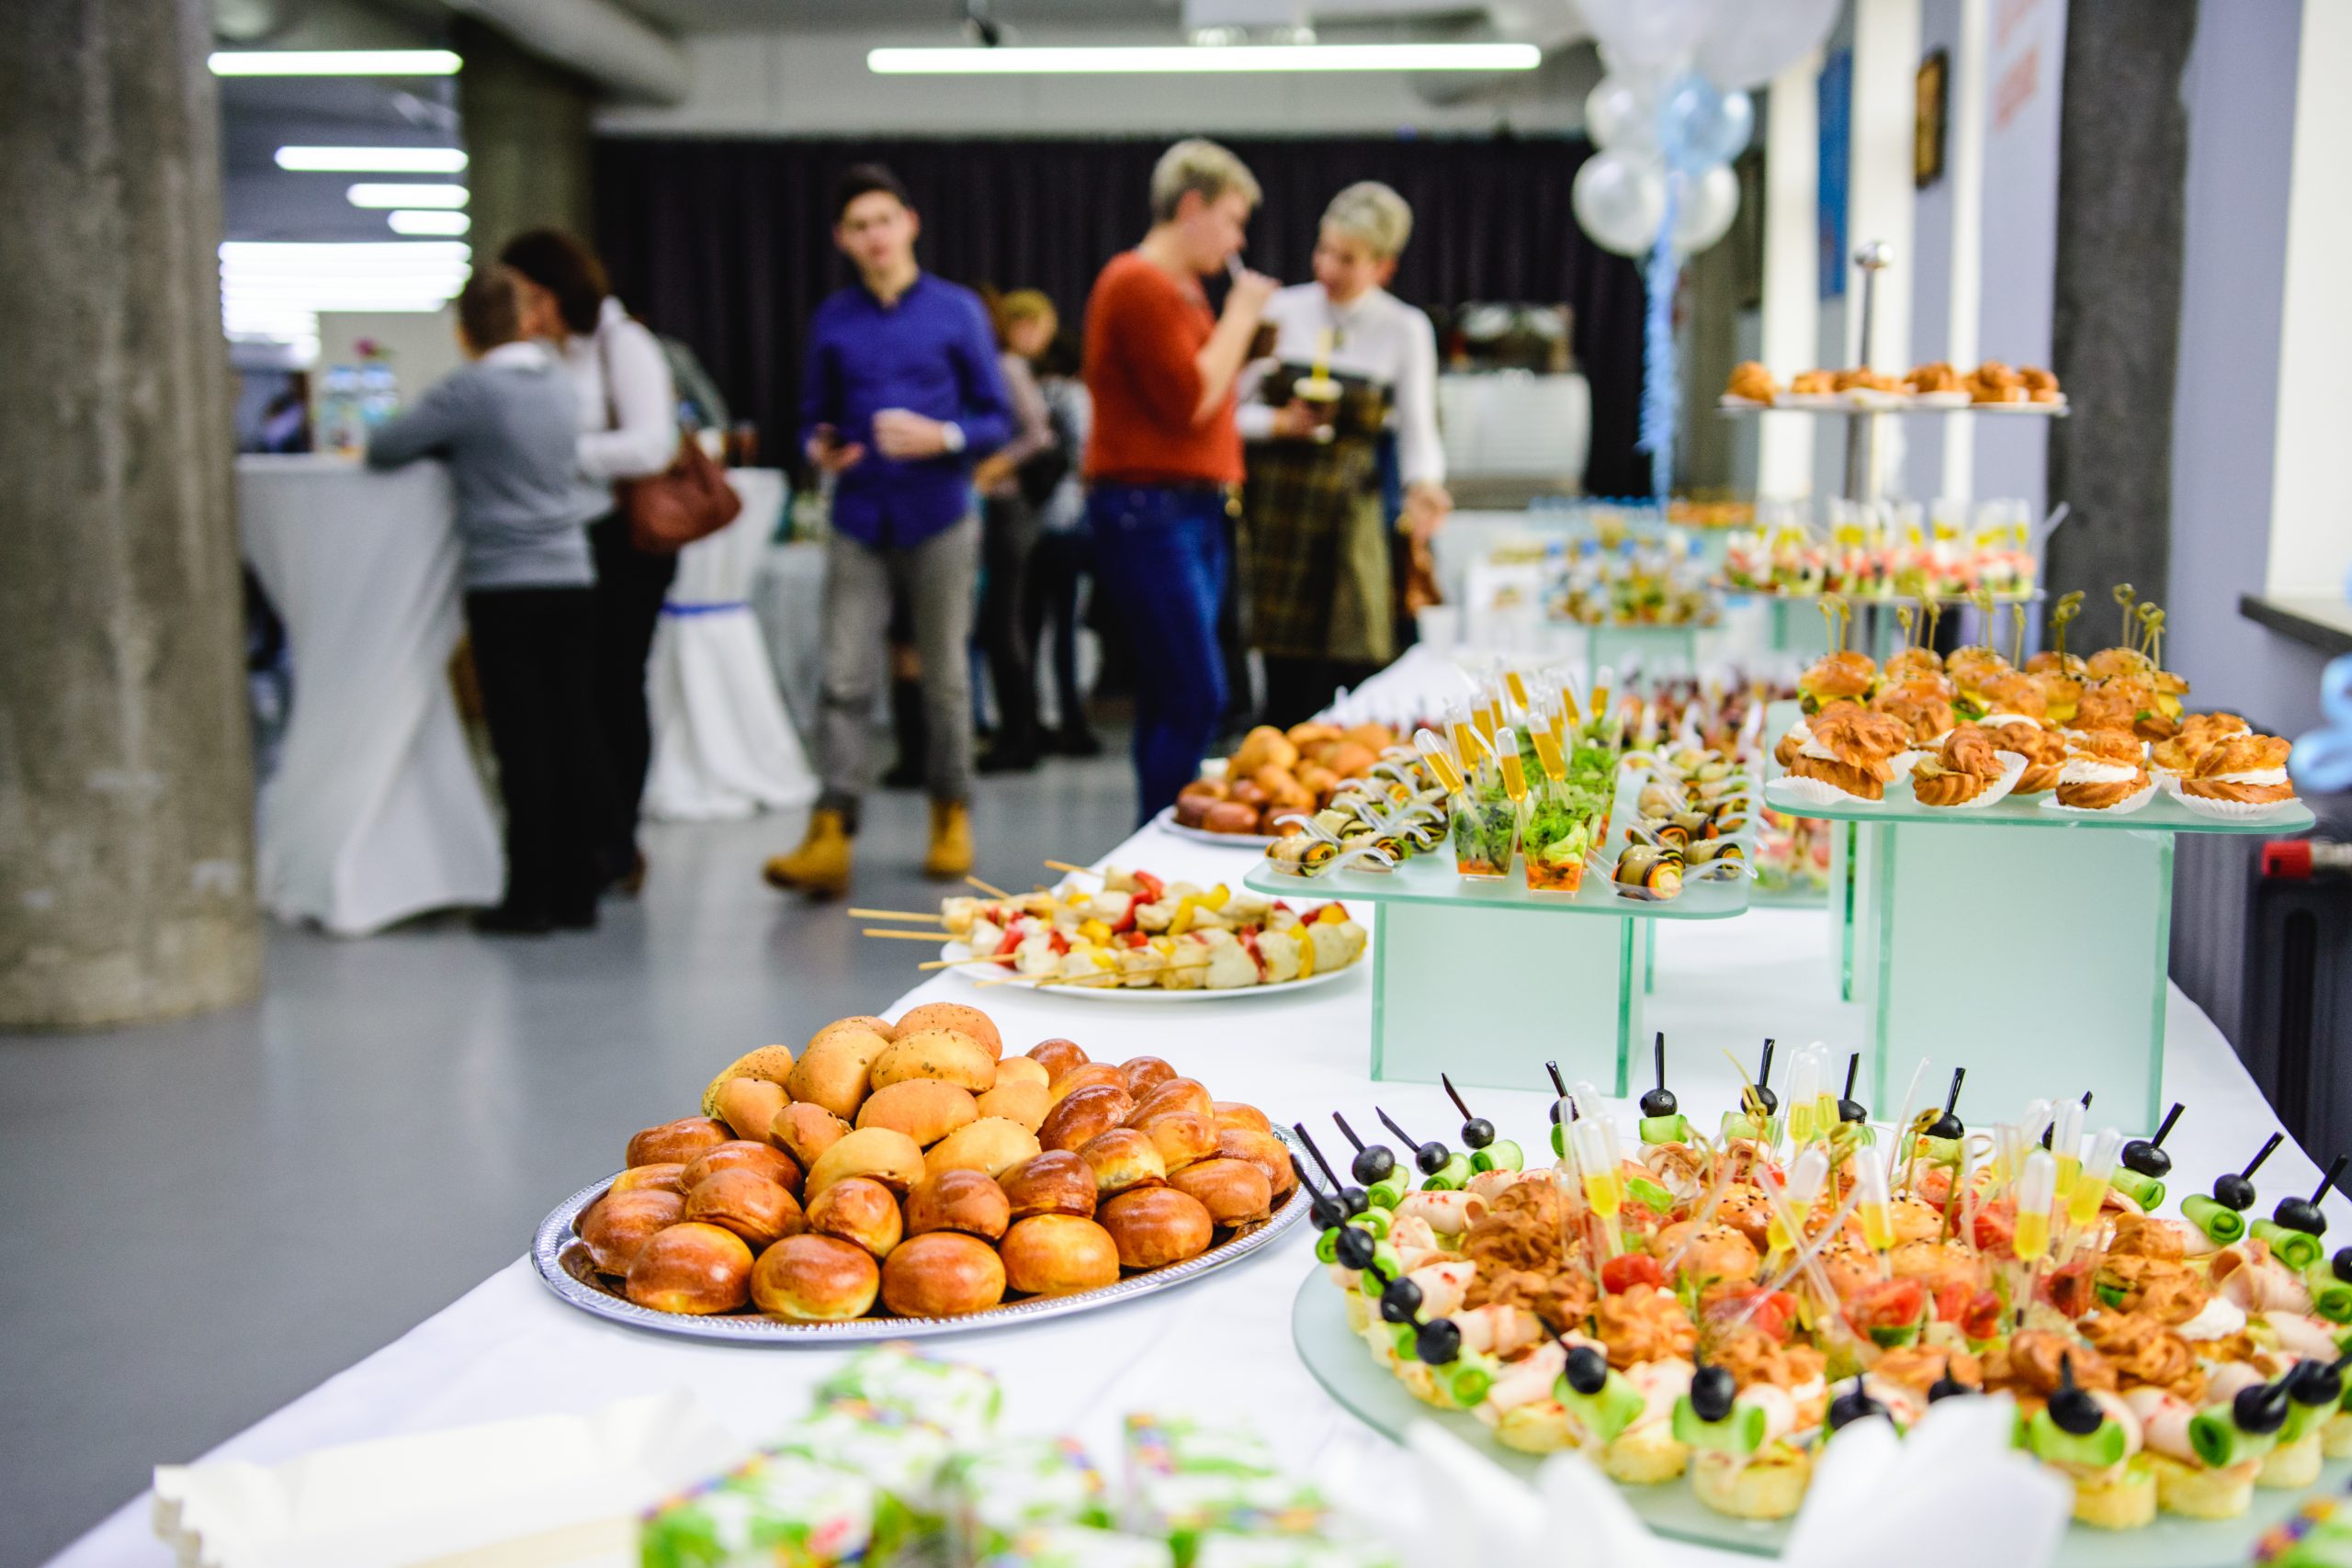 Food Station Catering Ideas for Corporate Events | Square Catering Blog